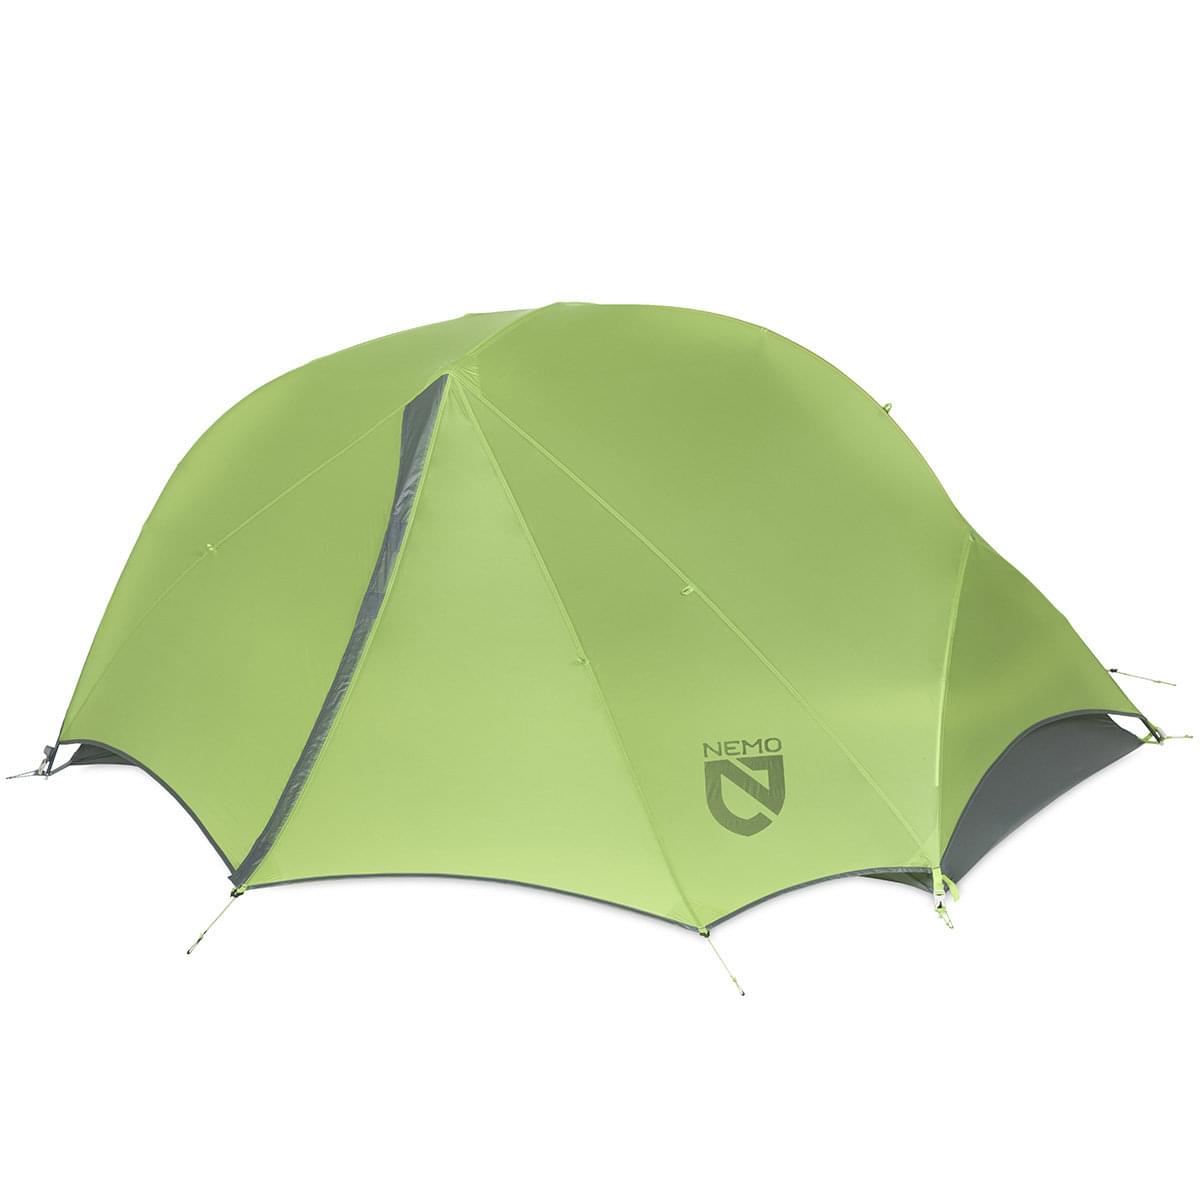 Nemo Dragonfly 3P Tent - Ascent Outdoors LLC